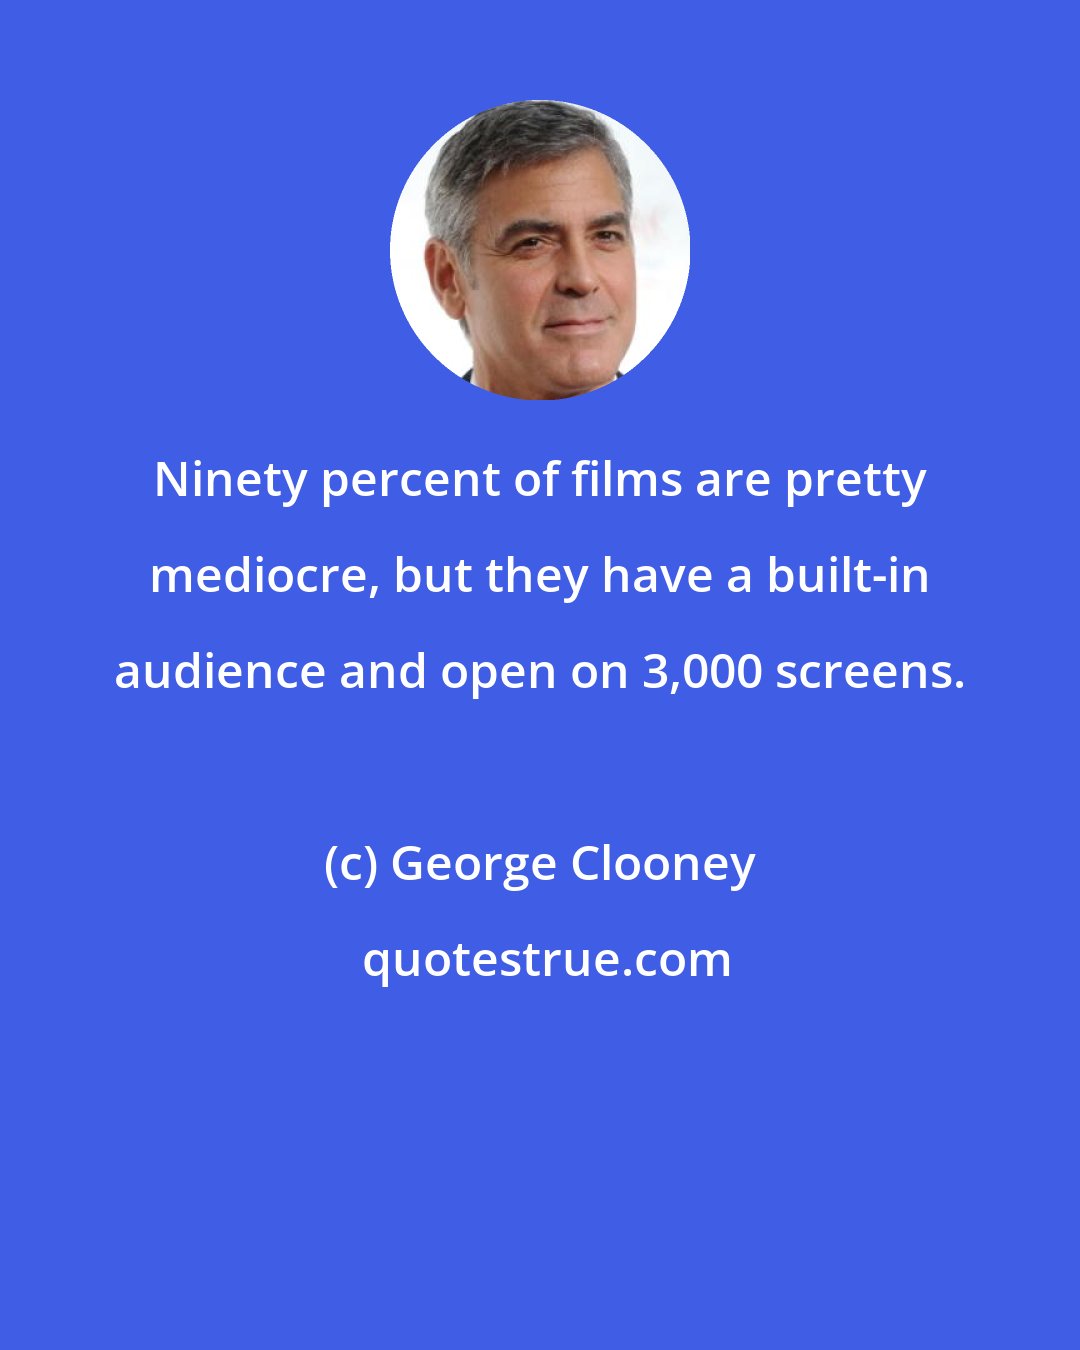 George Clooney: Ninety percent of films are pretty mediocre, but they have a built-in audience and open on 3,000 screens.